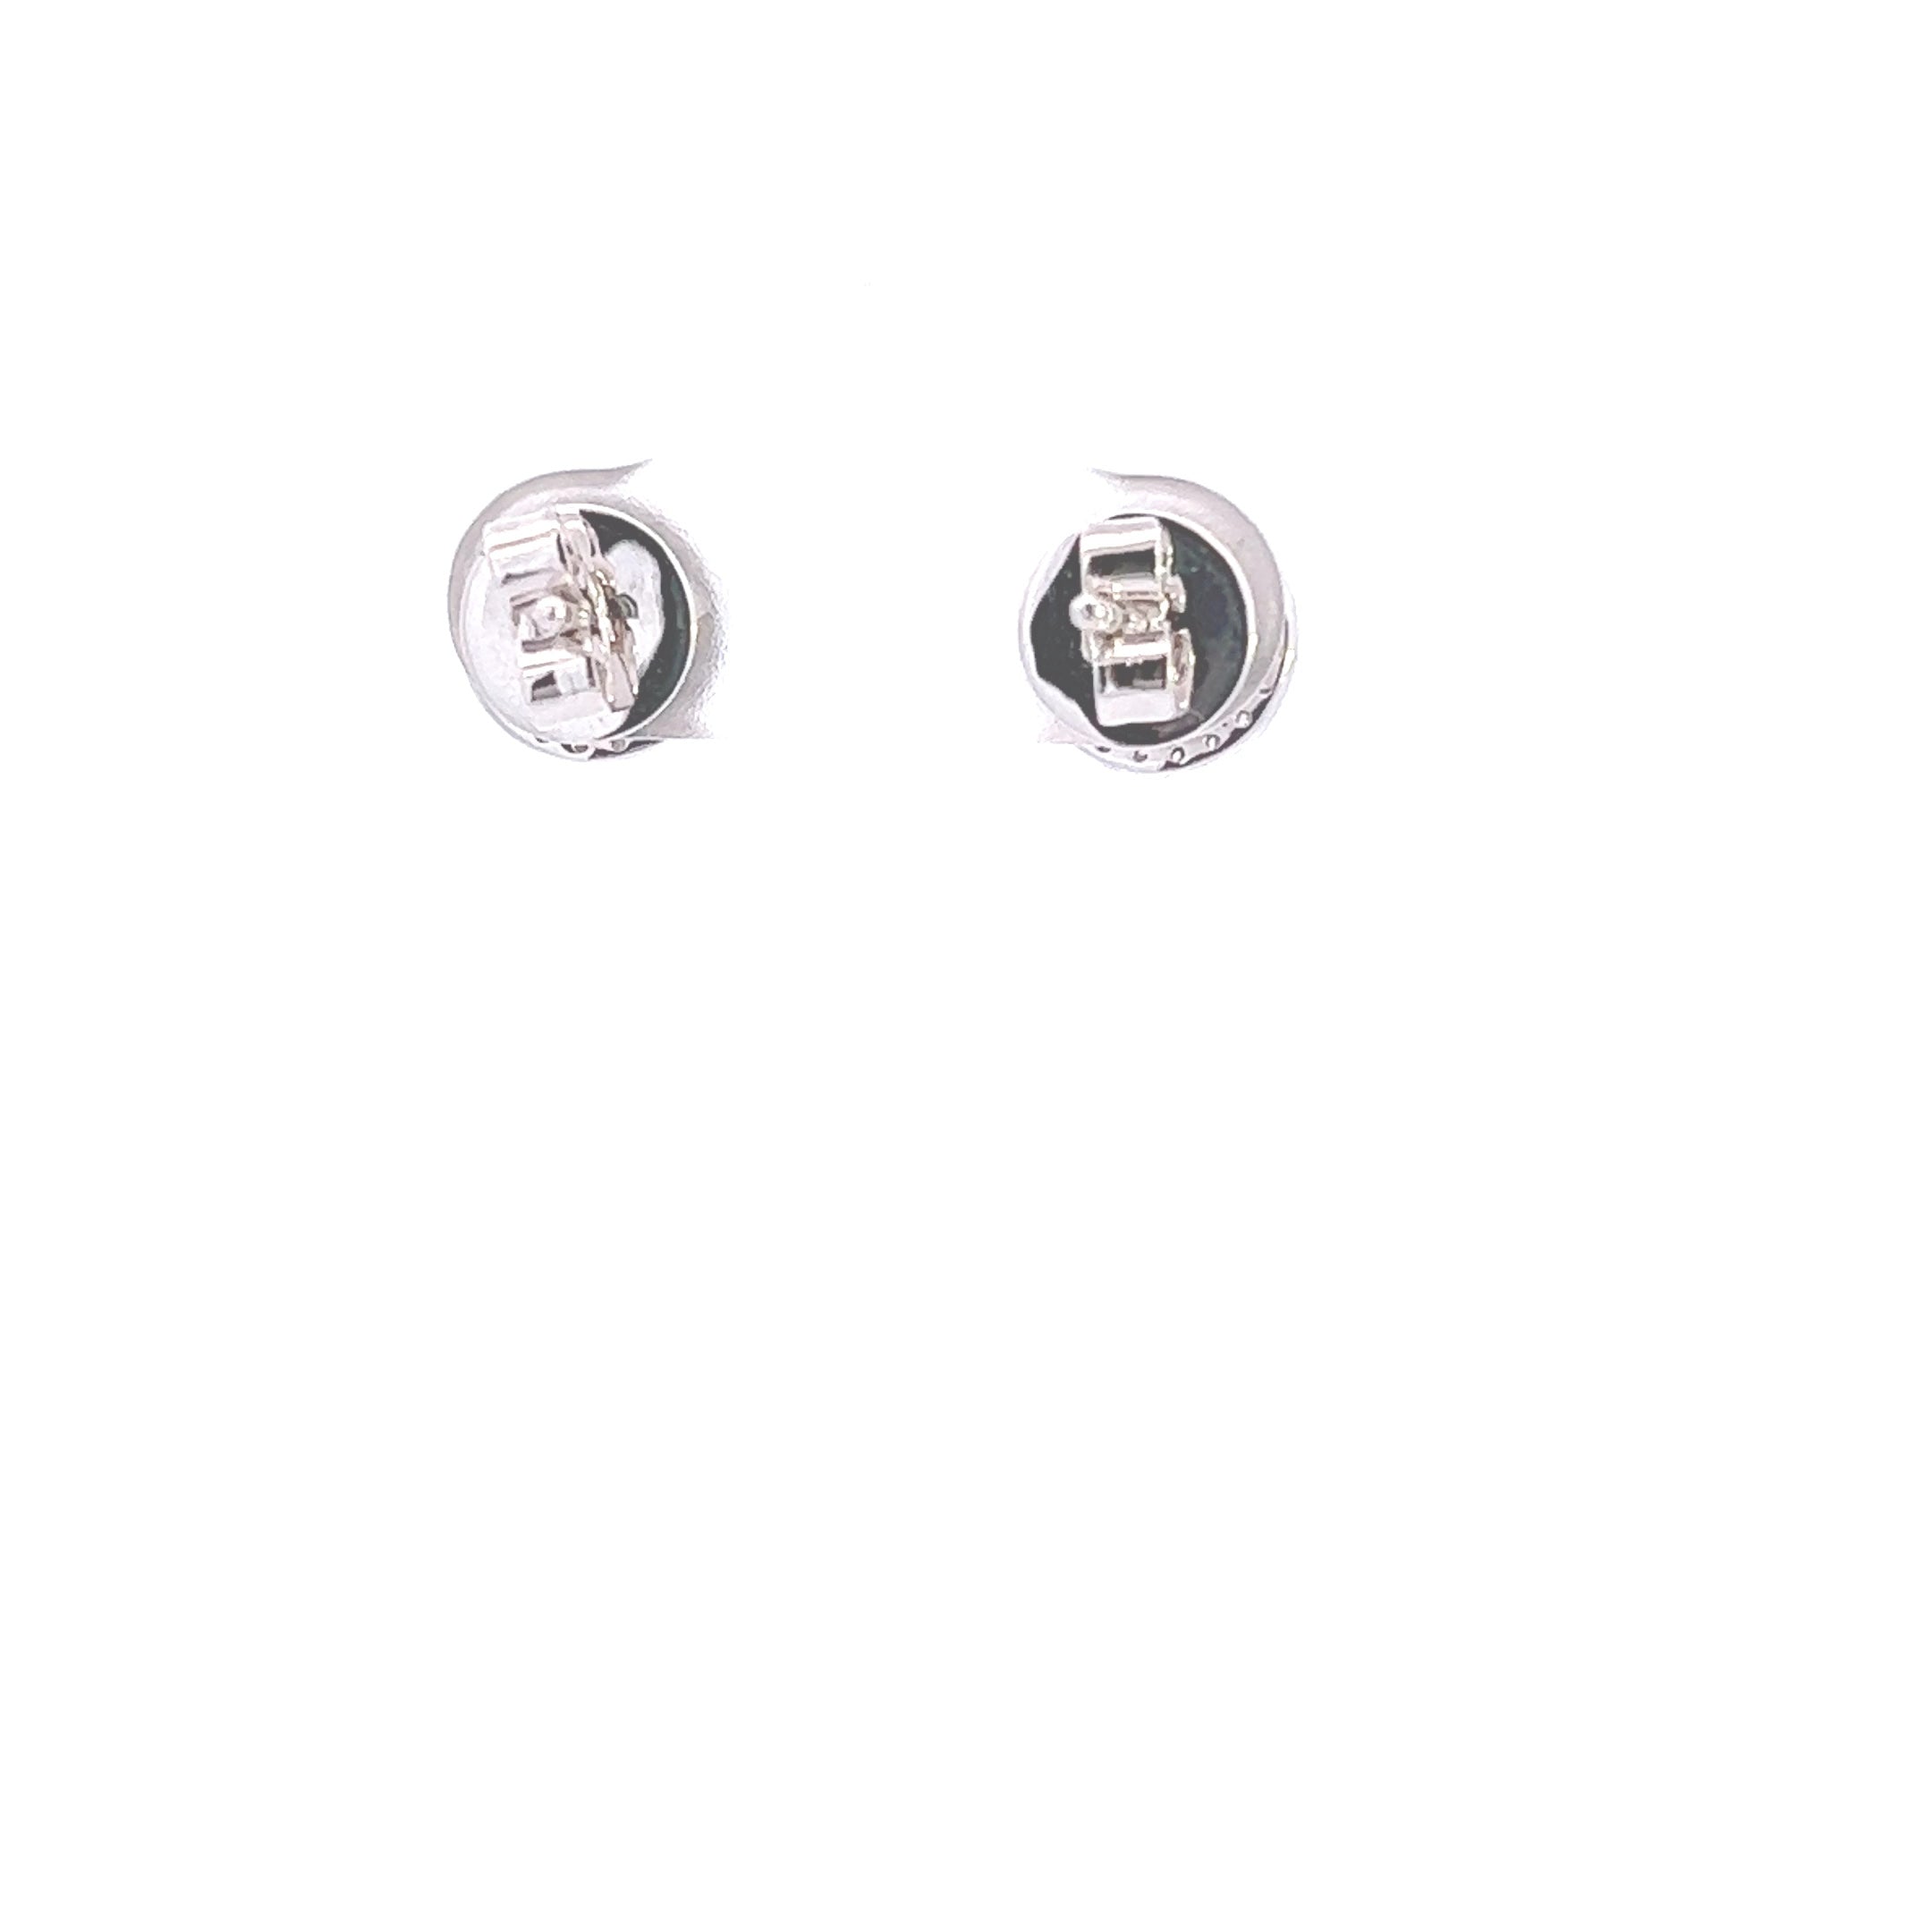 Round And Fancy Black Stone Cut Diamond Gold Stud Earring